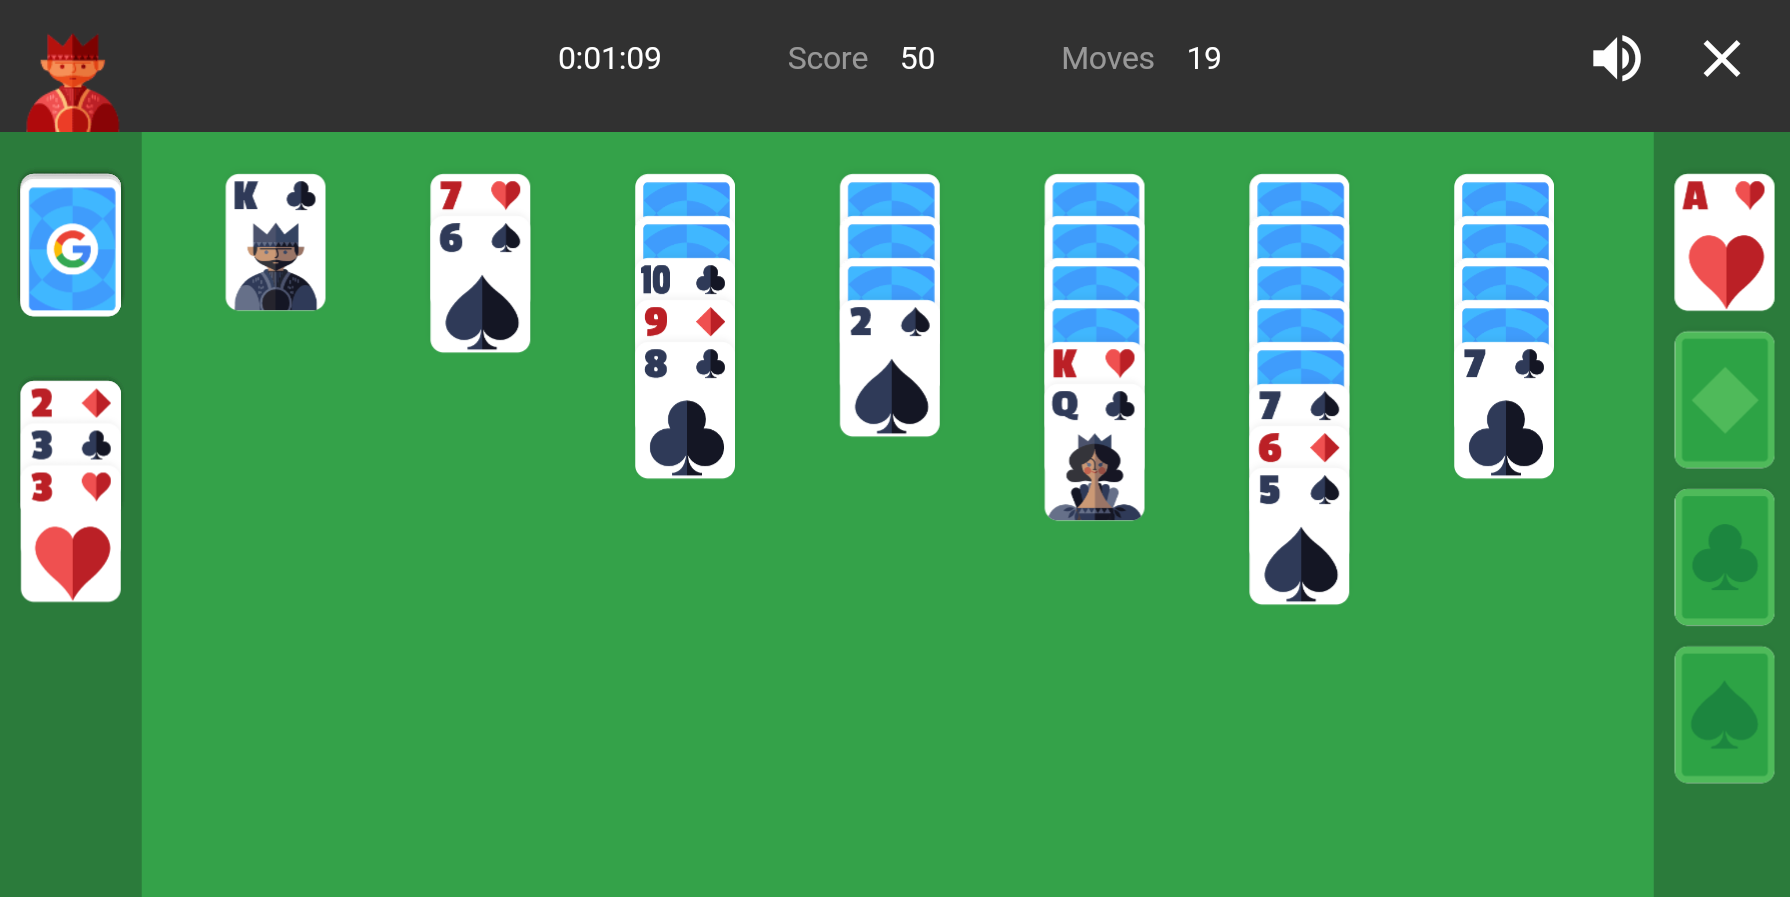 You can now play Solitaire and Tic-Tac-Toe in Google's search